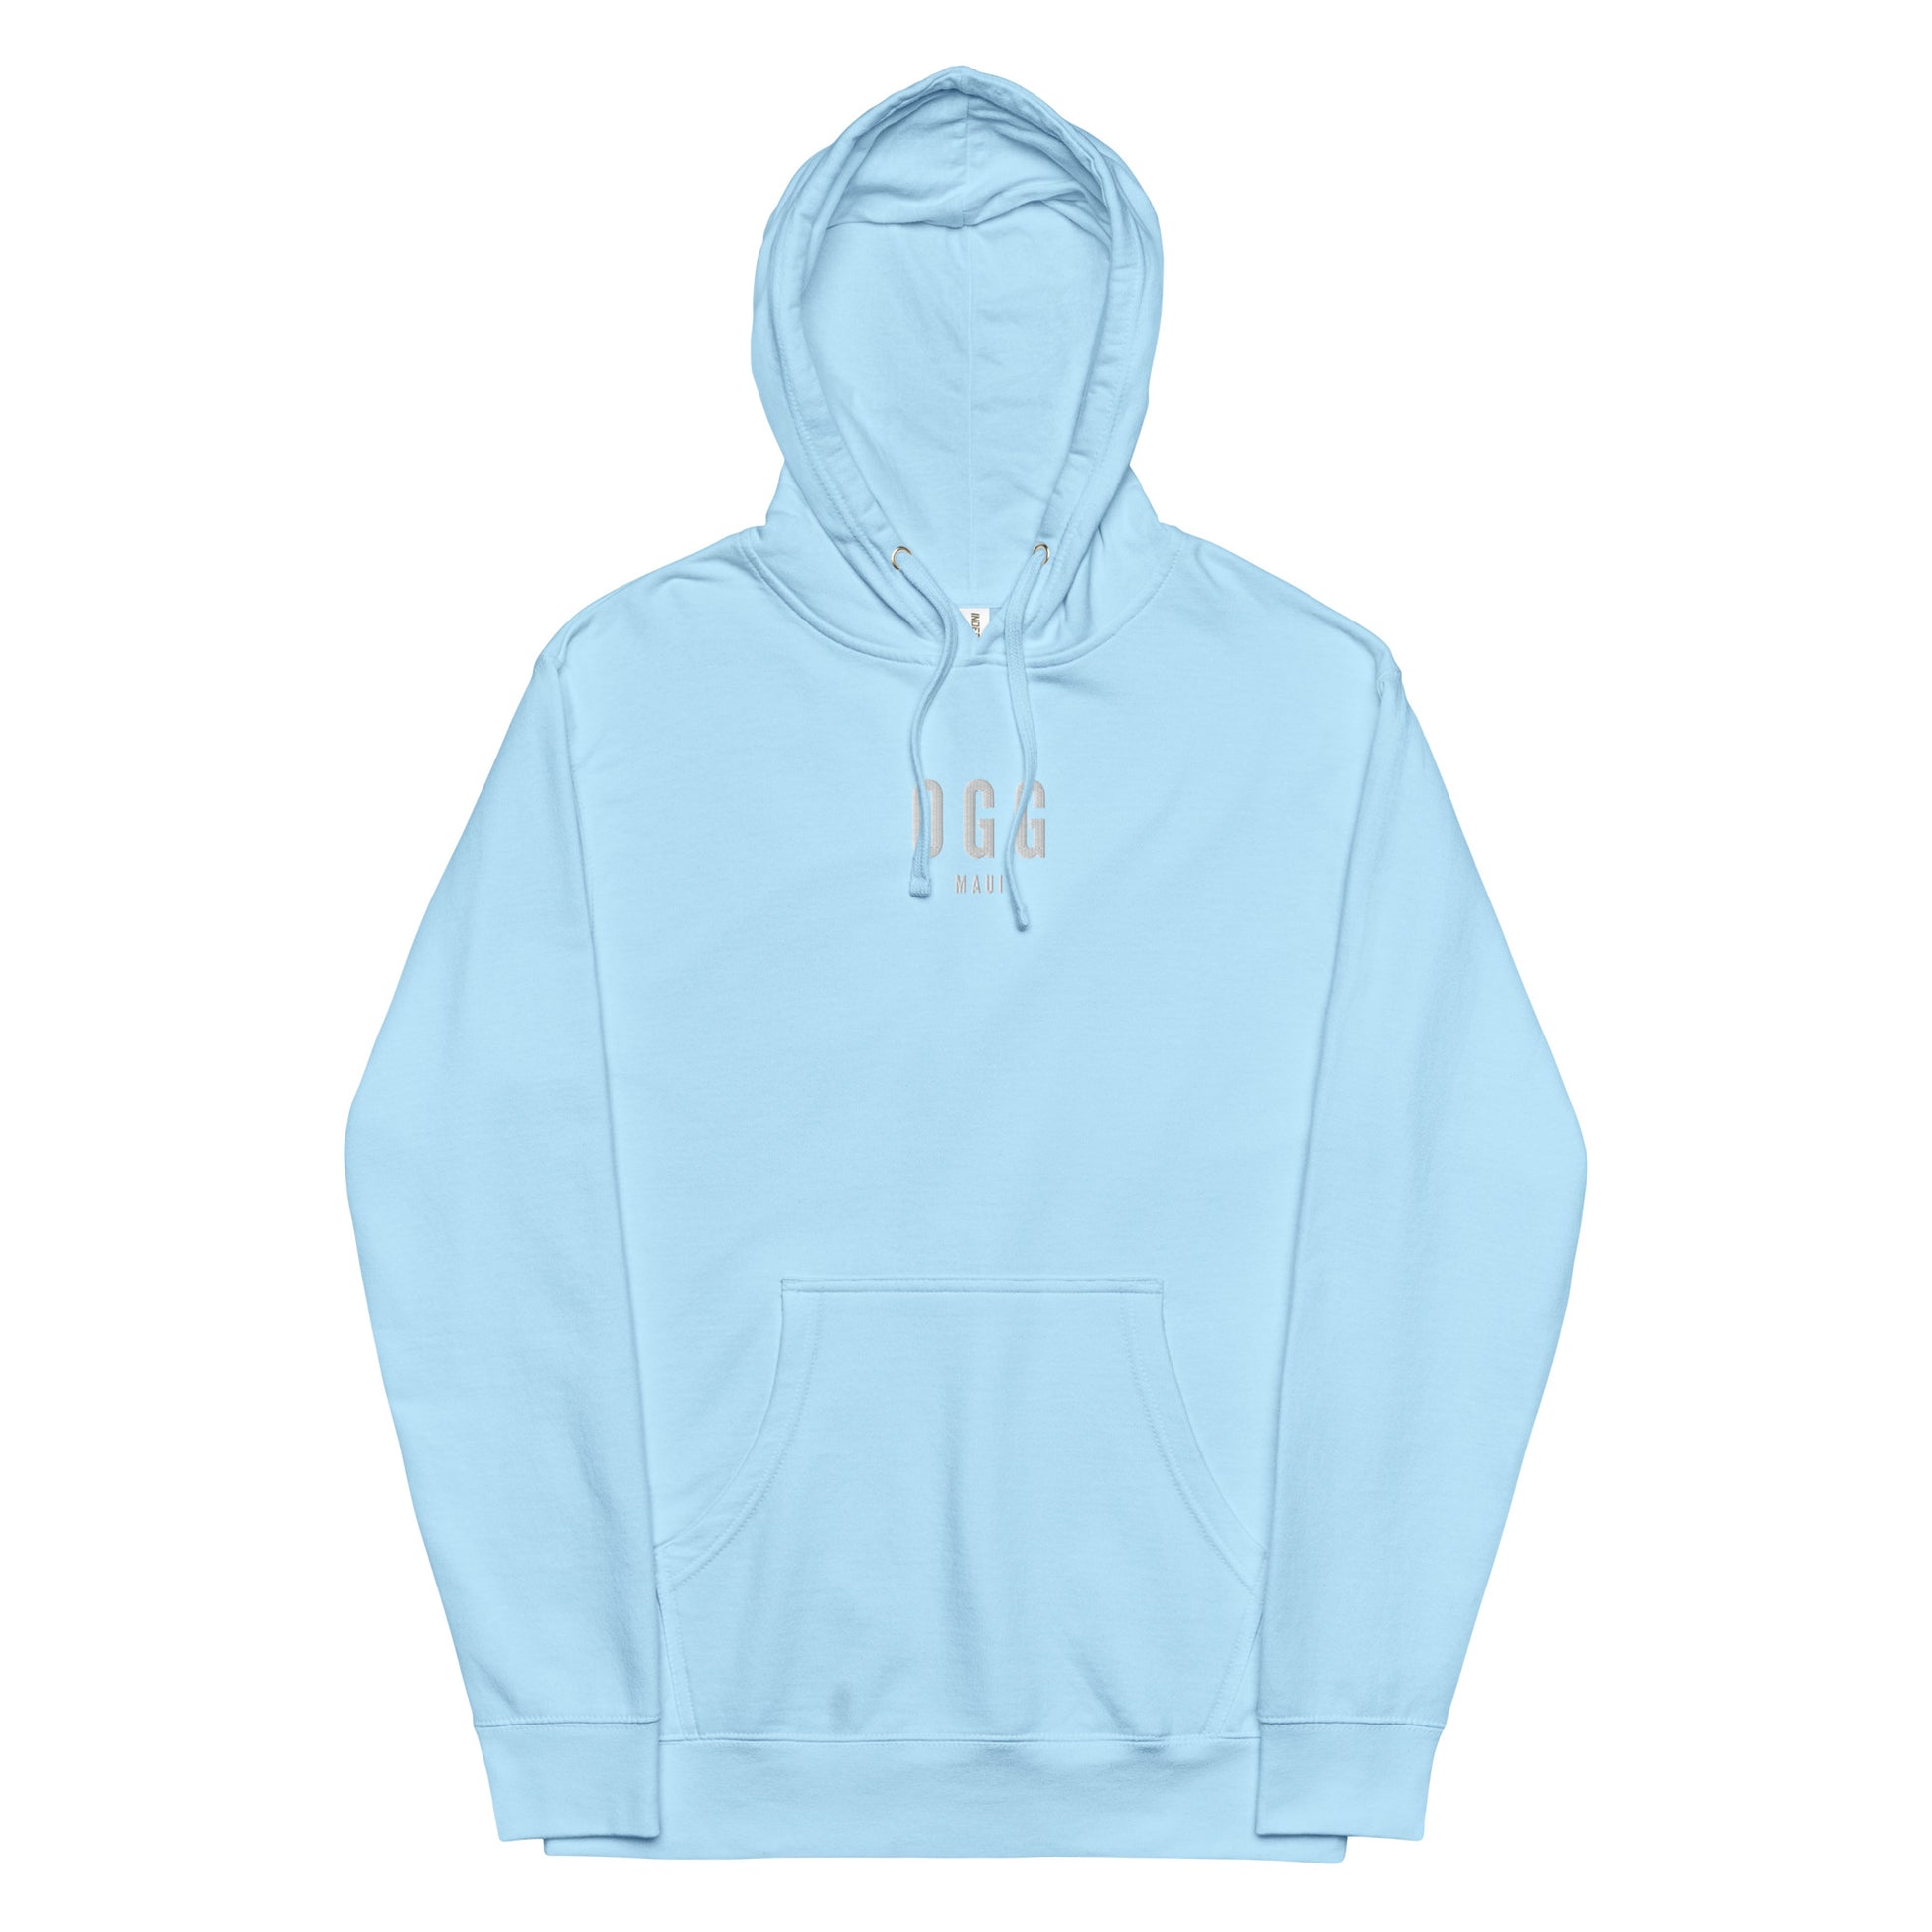 City Midweight Hoodie - White • OGG Maui • YHM Designs - Image 14